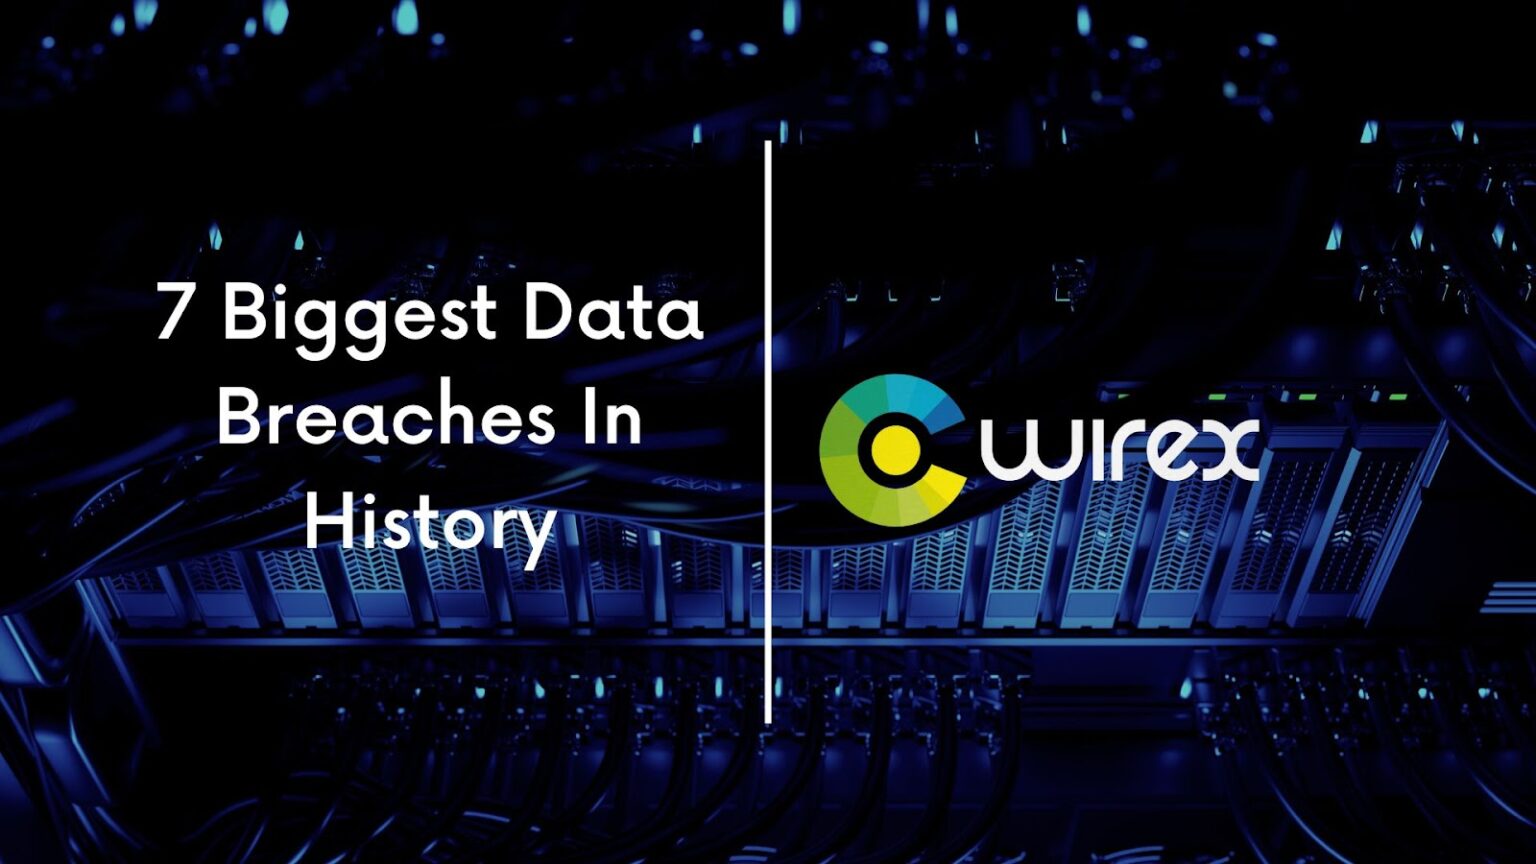 7 Biggest Data Breaches In History